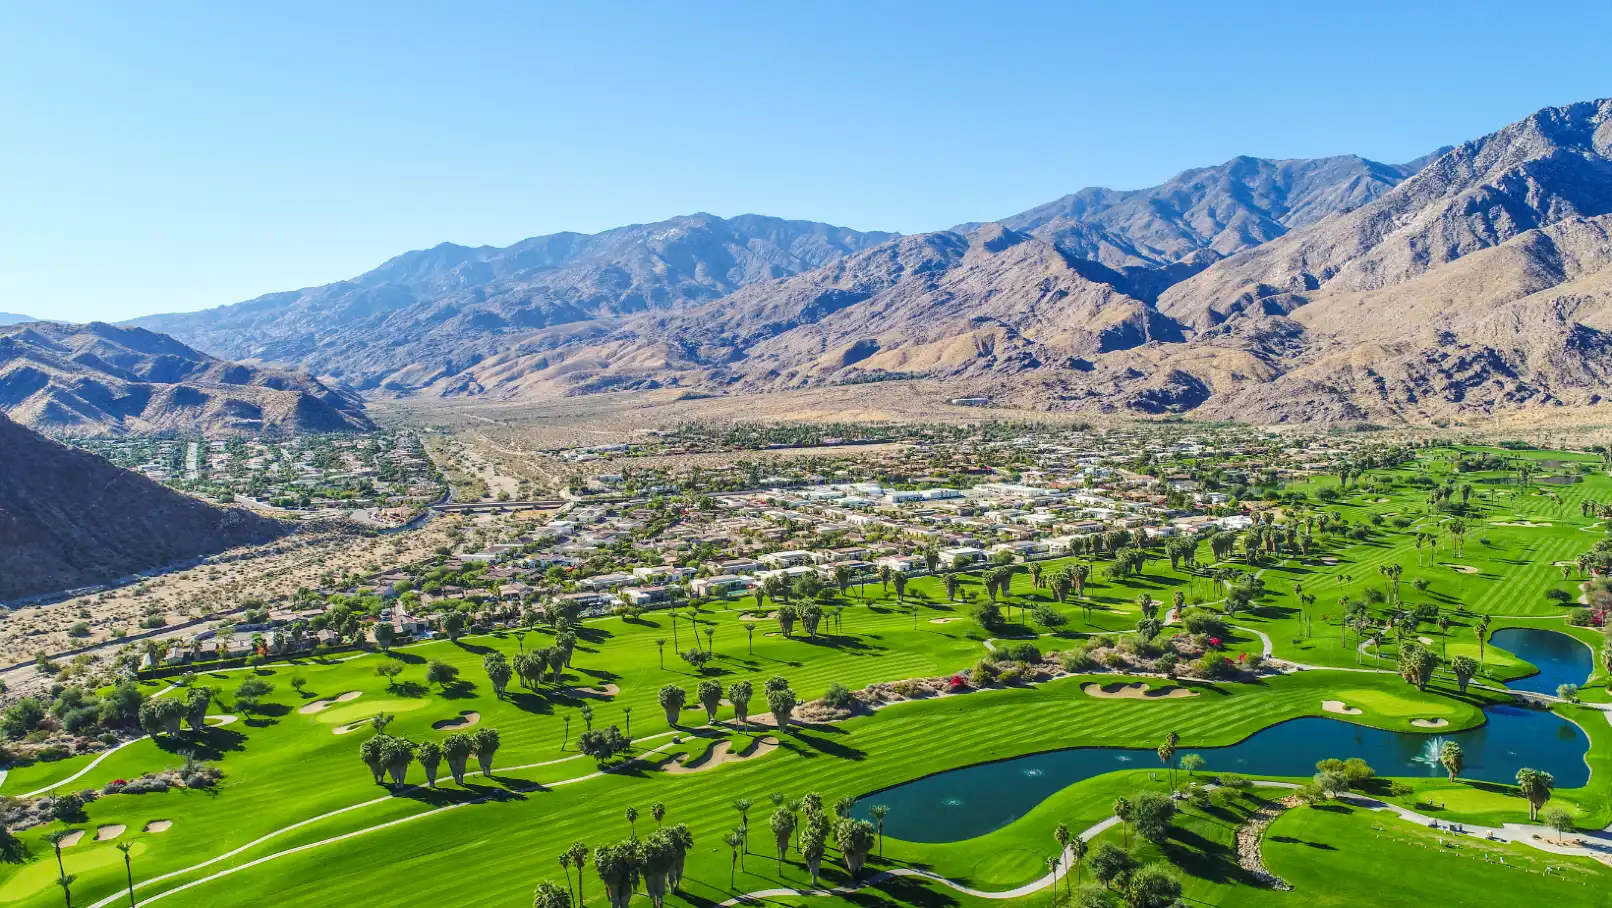 Palm Springs Homes for Sale